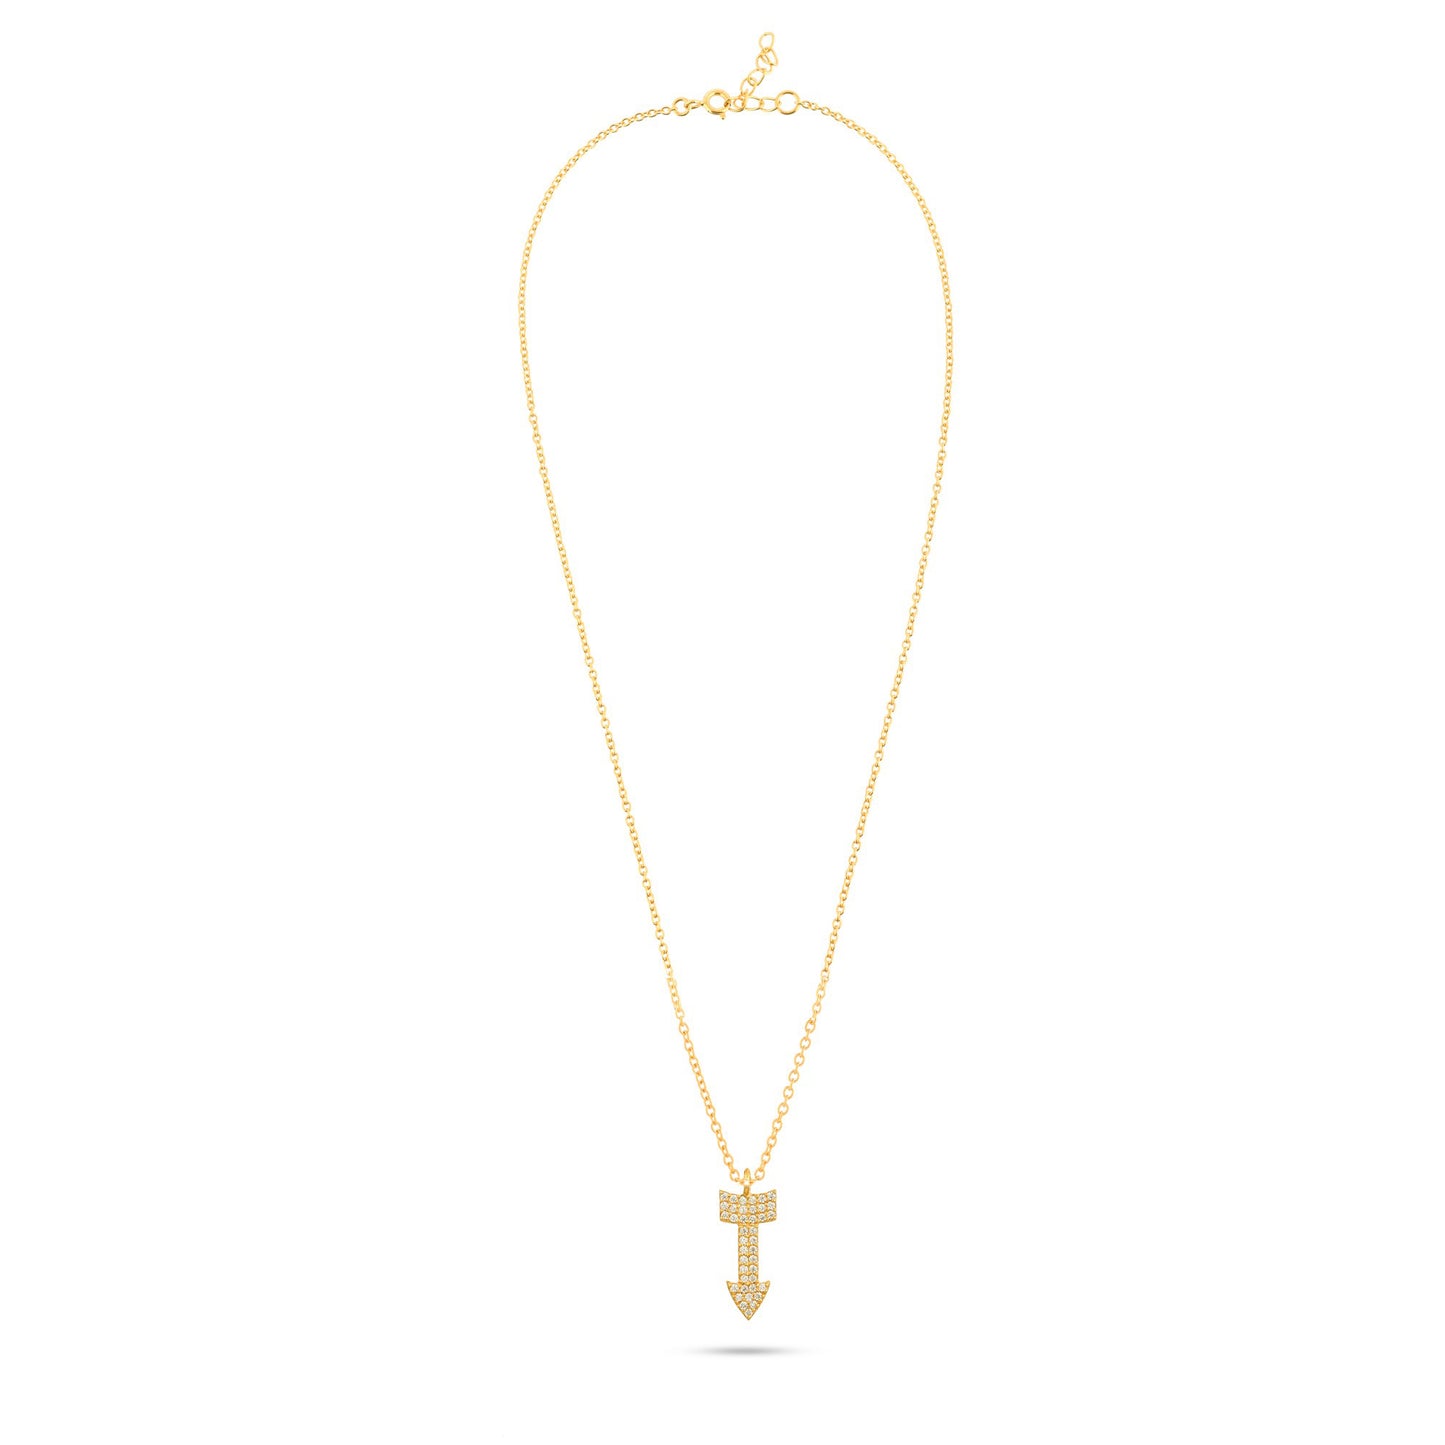 Guiding Grace: Gold-Plated Arrow Necklace - From Purl Purl